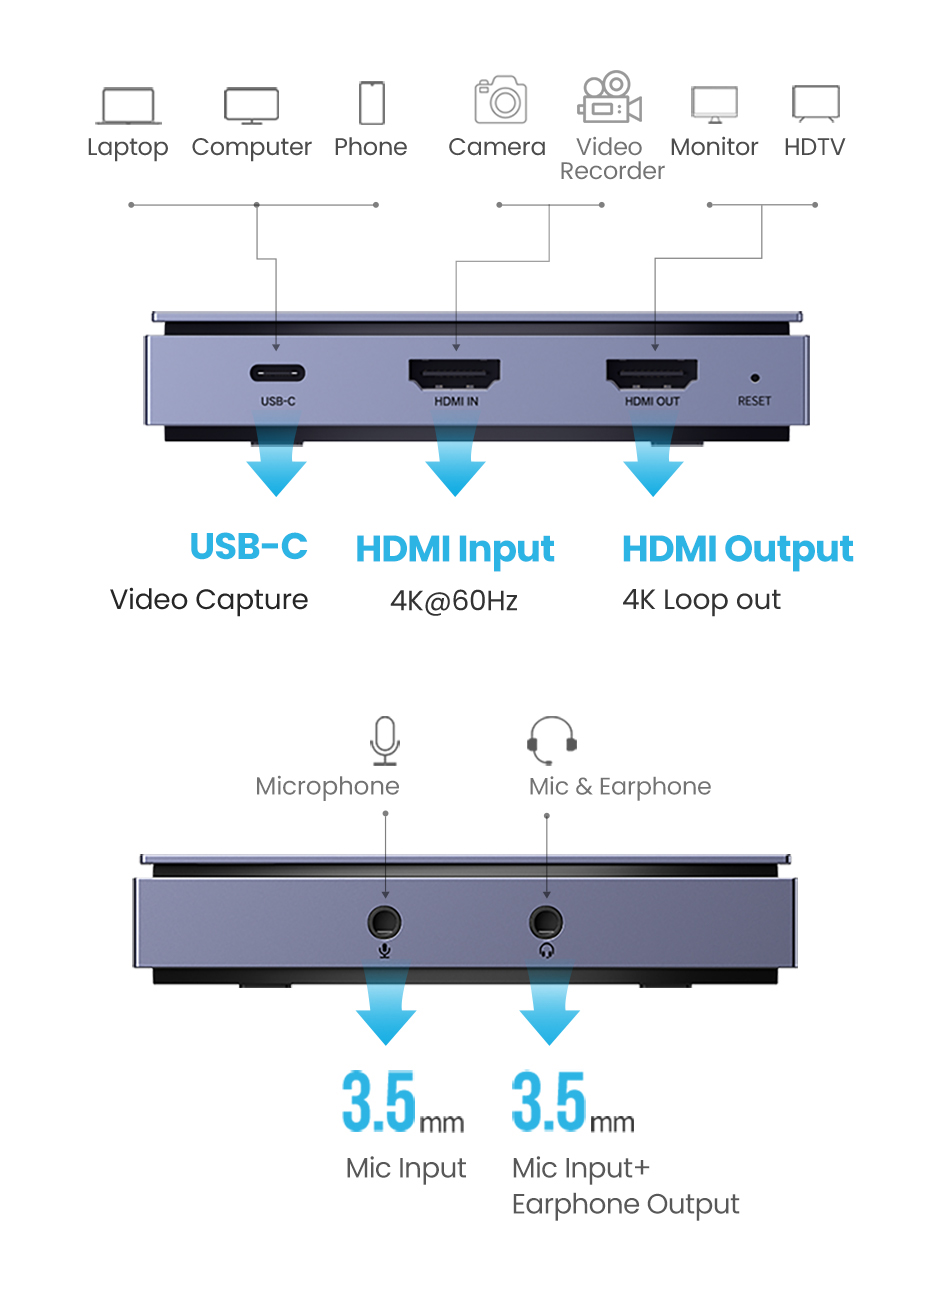 NEW-IN】UGREEN Video Capture Card 4K HDMI to USB/USB-C HDMI Video Grabber  Box for PC Computer Camera Live Stream Record Meeting